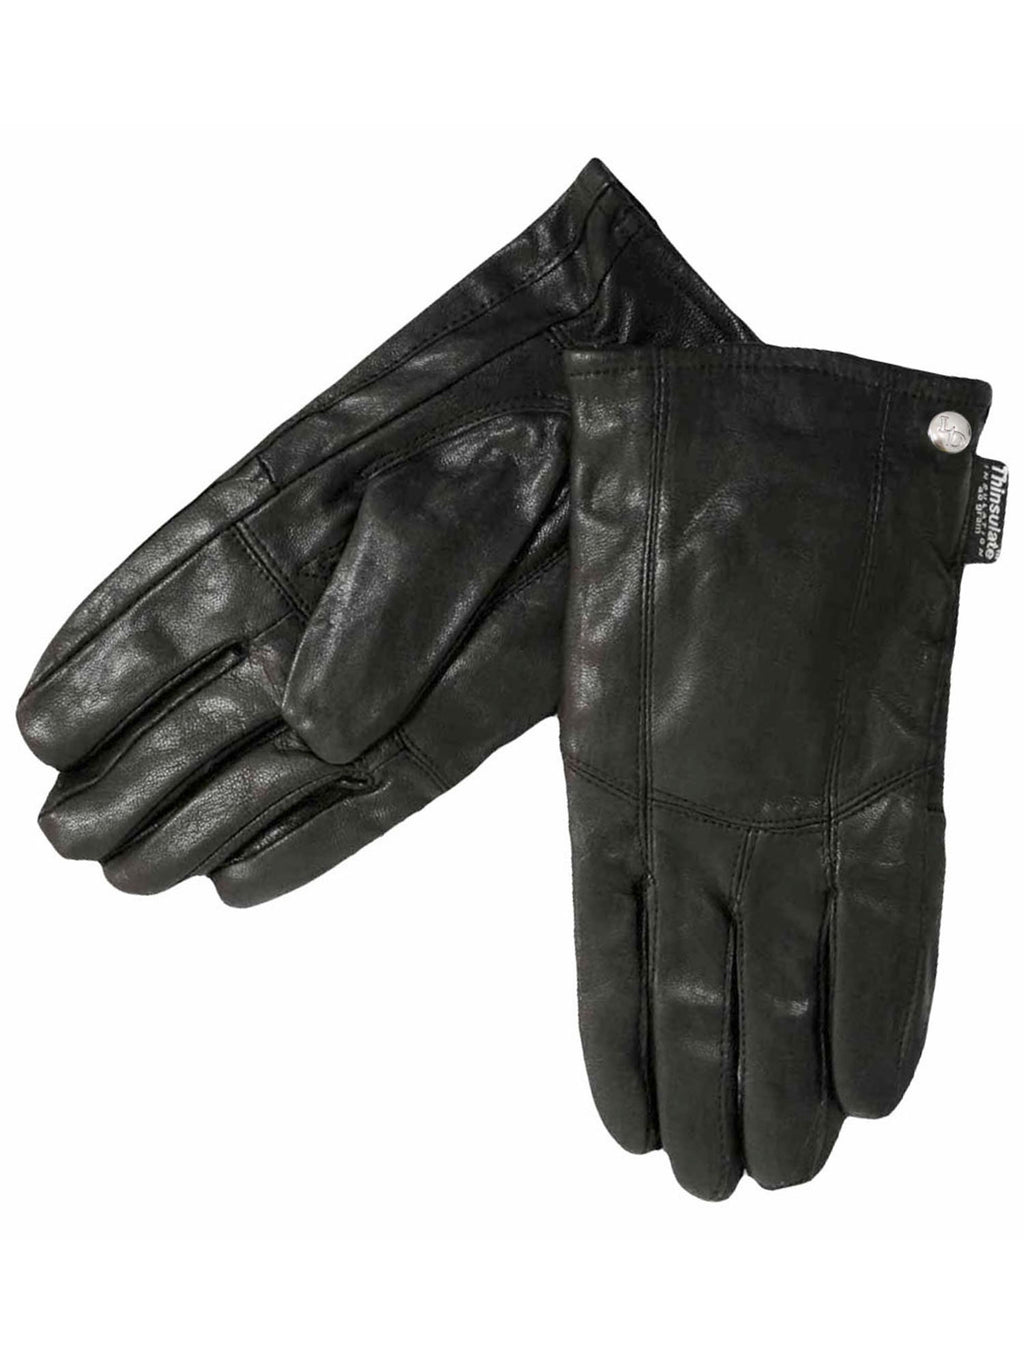 Mens Soft Black Leather 3M Thinsulate Winter Gloves